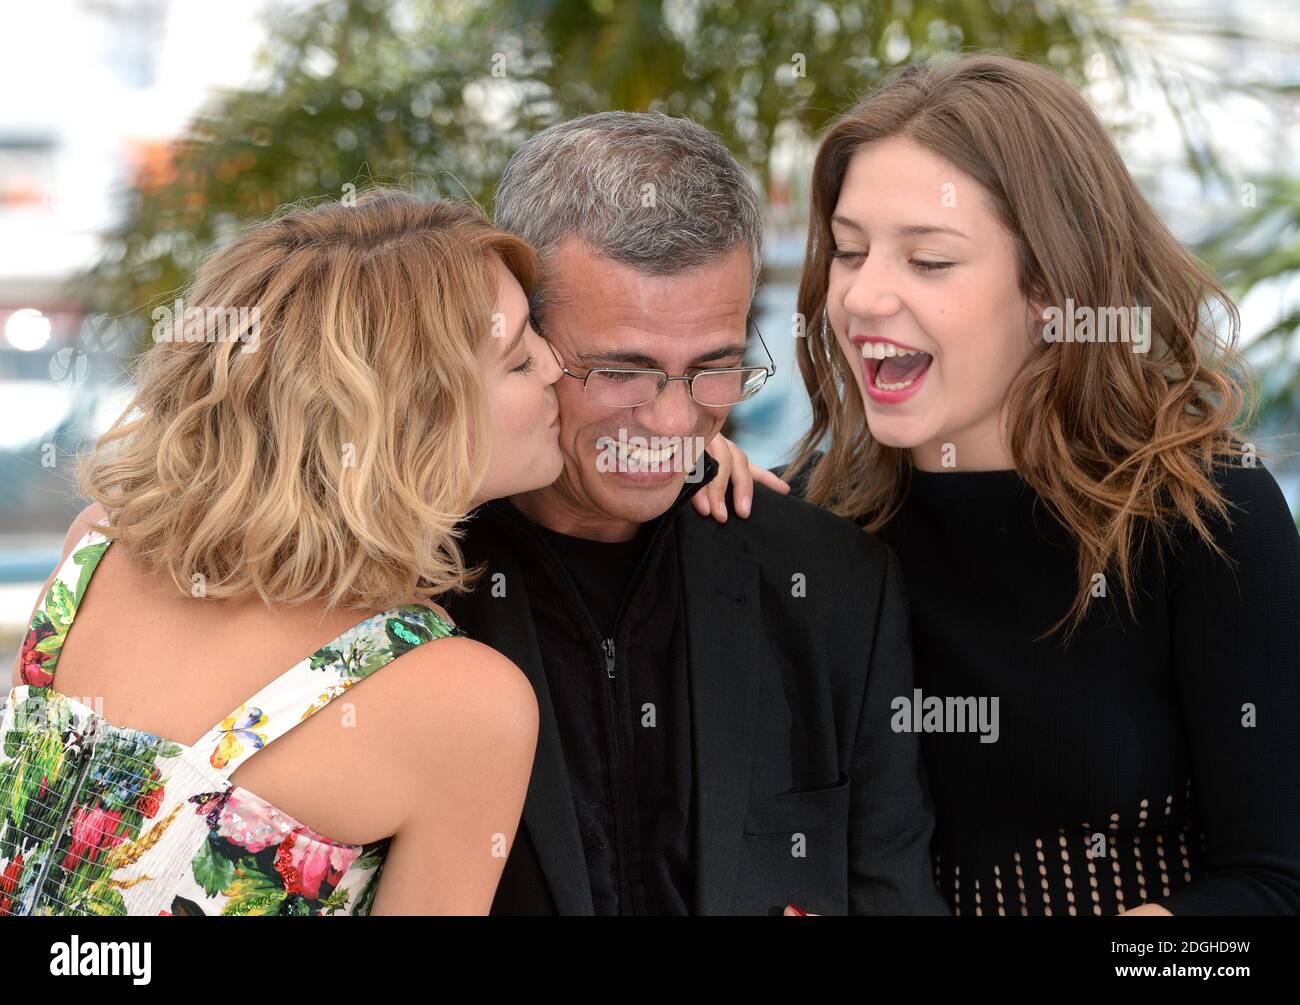 Léa Seydoux Reveals The Backlash She Recieved After Speaking Out Against  Abdellatif Kechiche